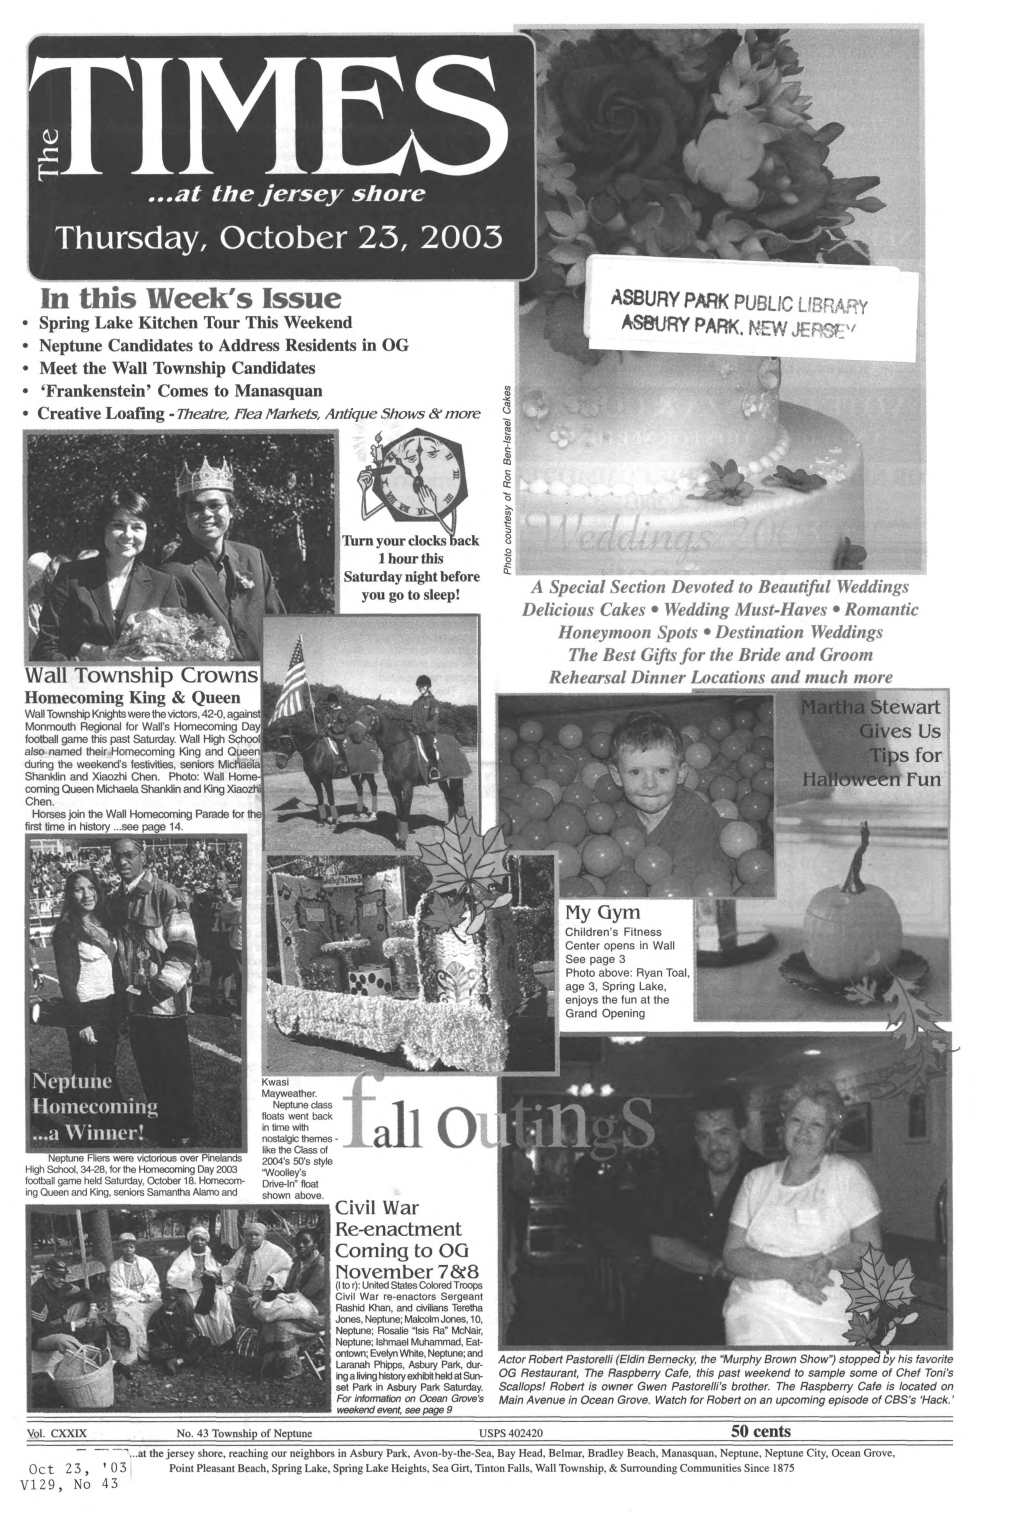 Jersey Shore Ay, October 23, 2003 in This Week's Issue